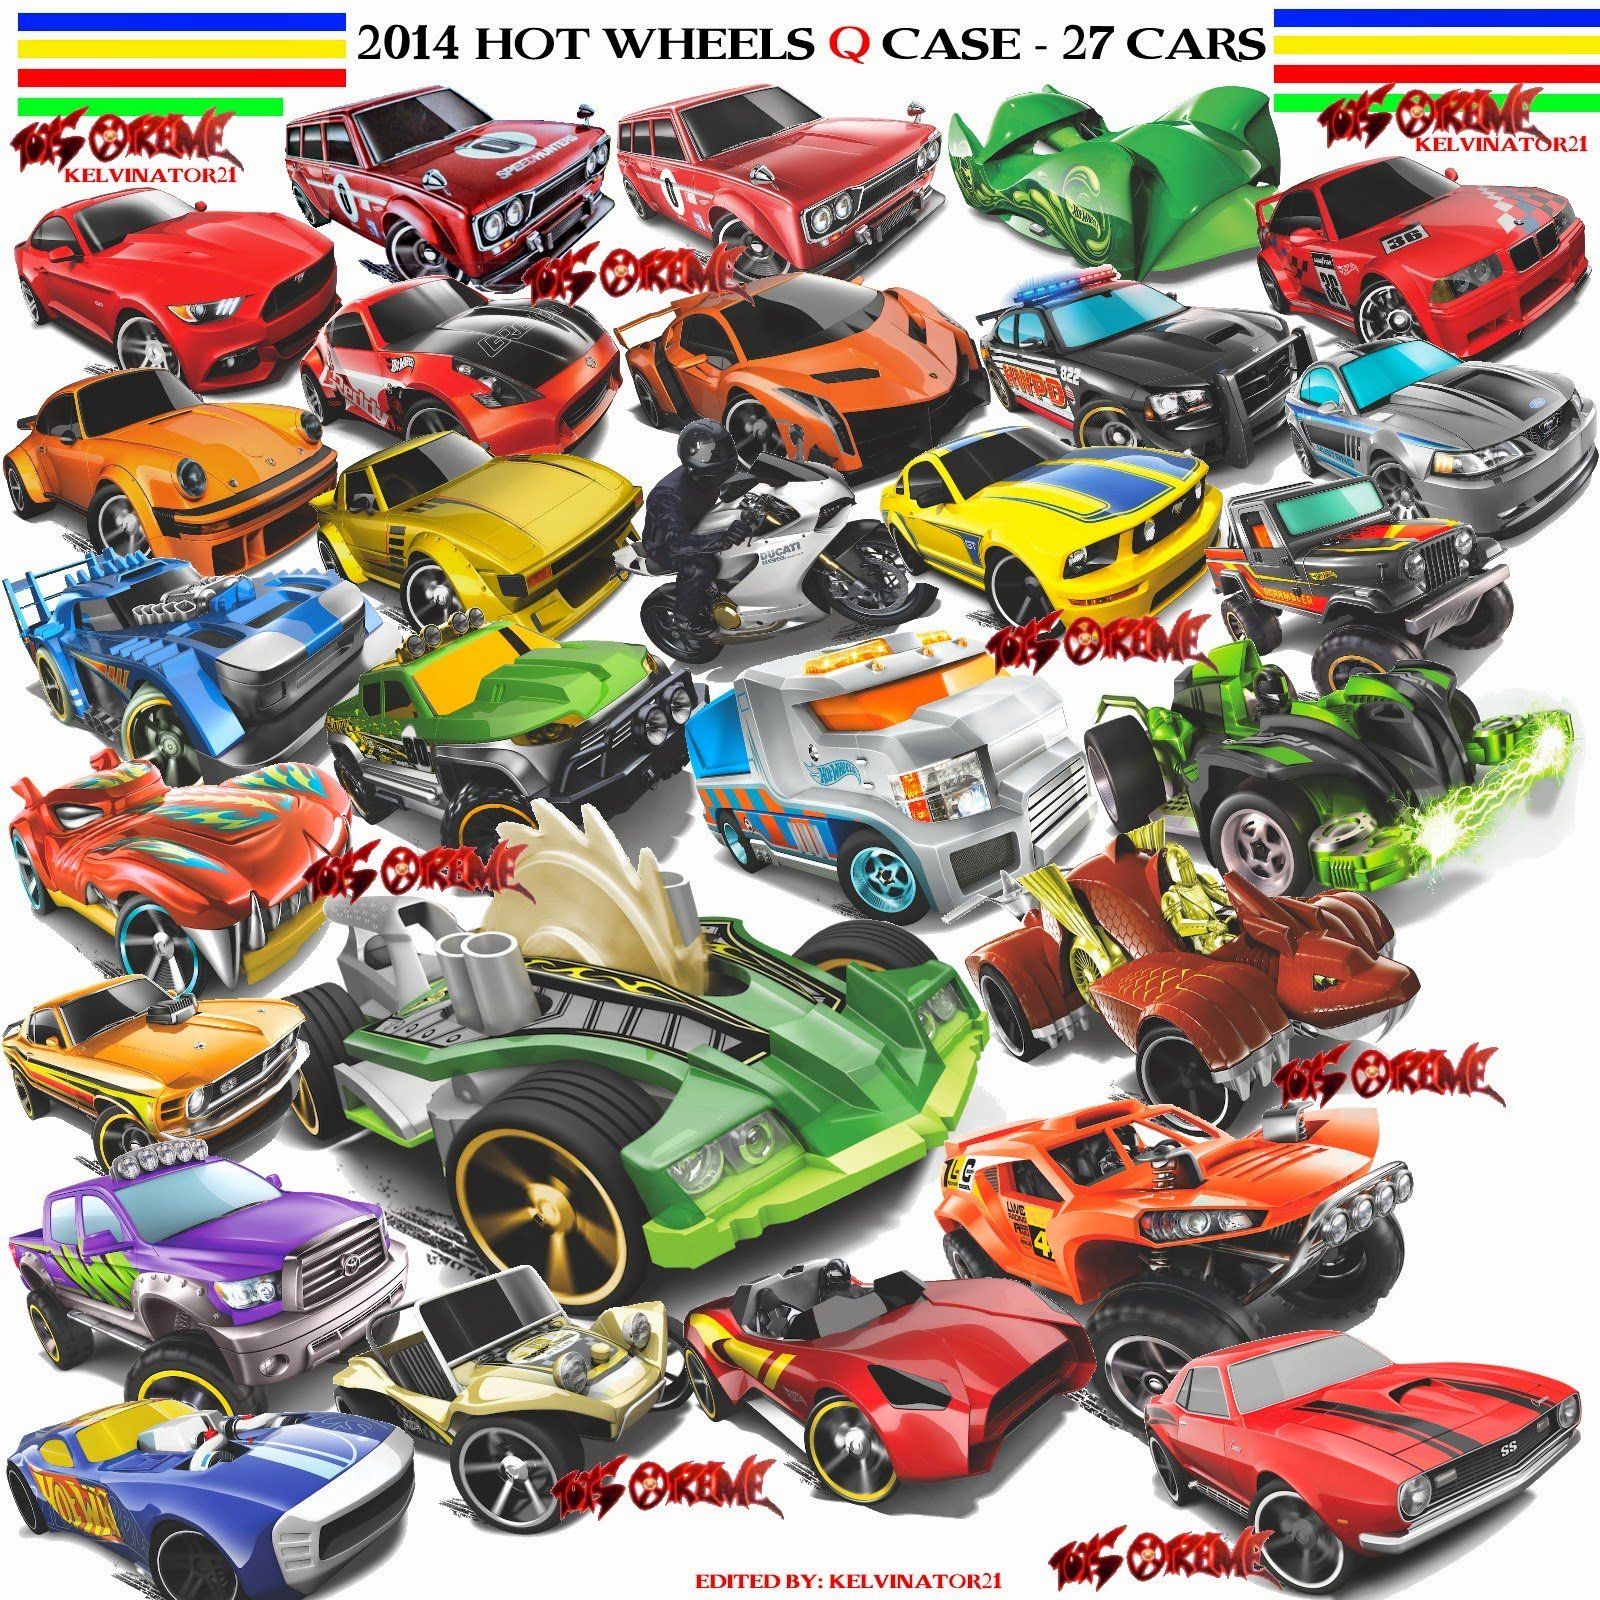 HOT WHEELS rod rods toy toys race racing hot wheels wallpaper